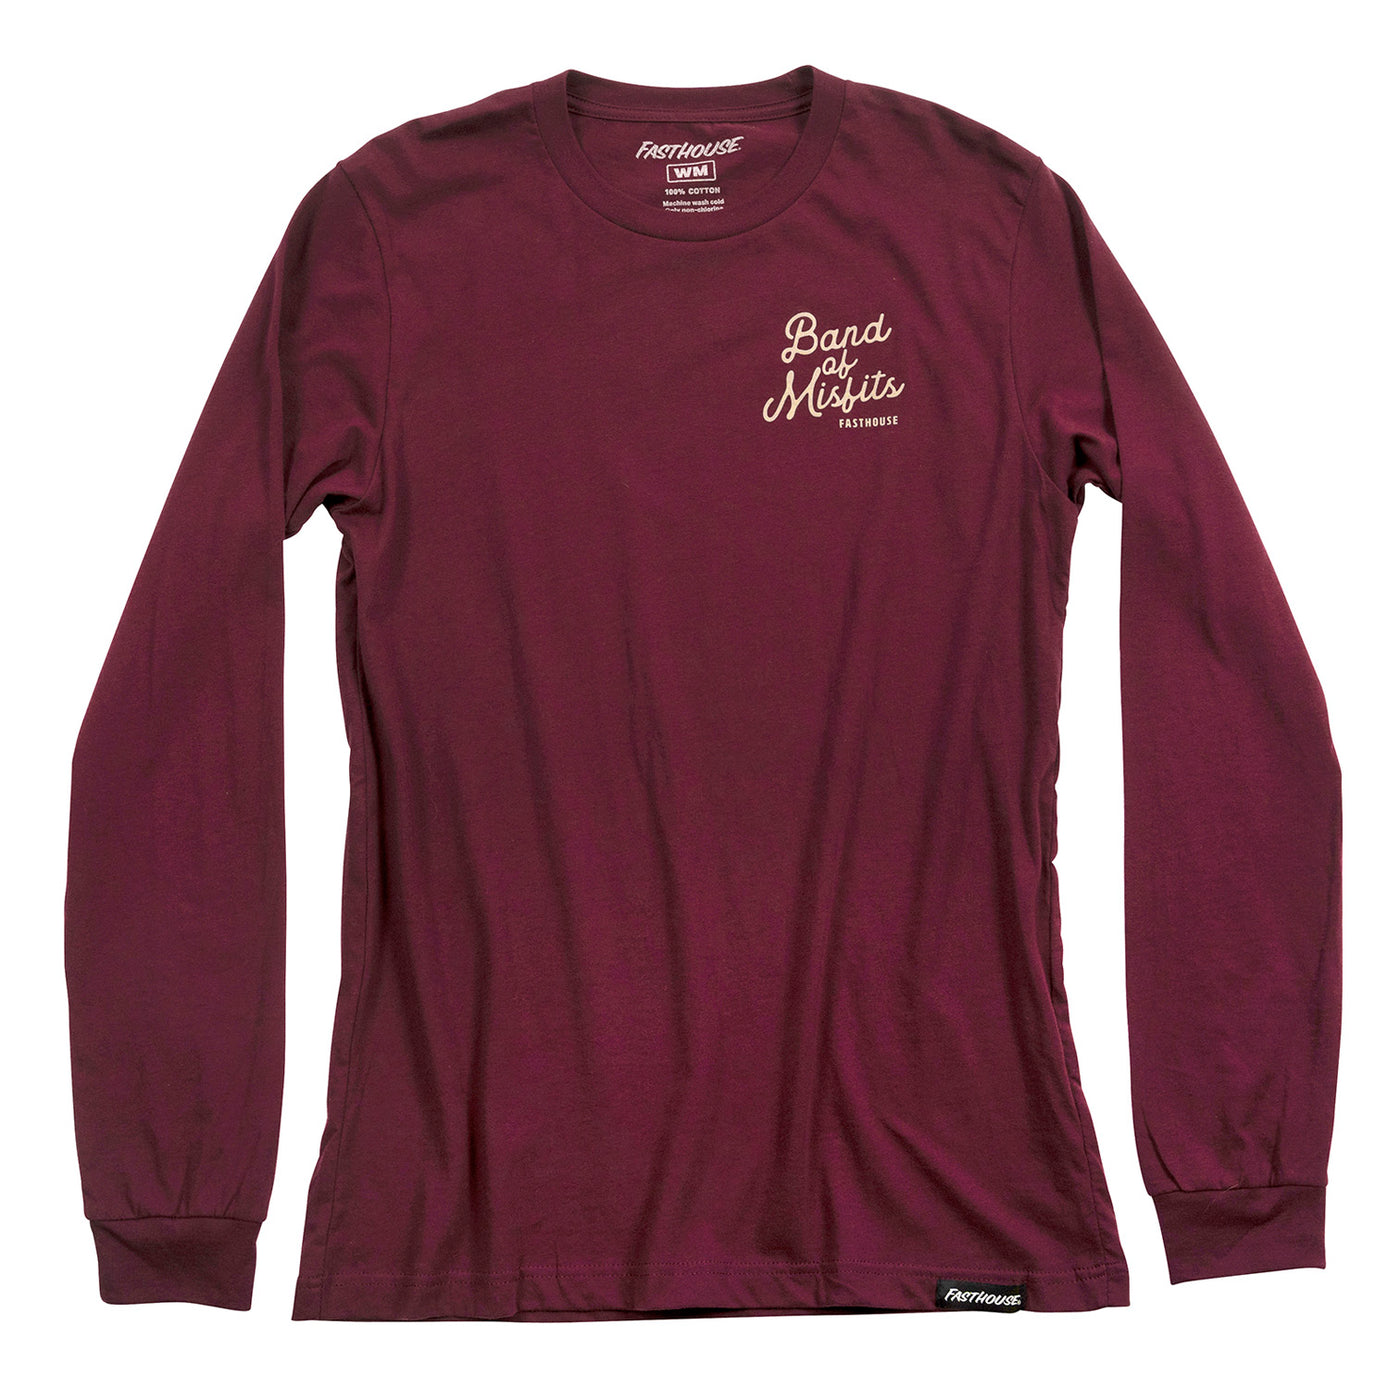 Fasthouse Women's Revival Long Sleeve Tee